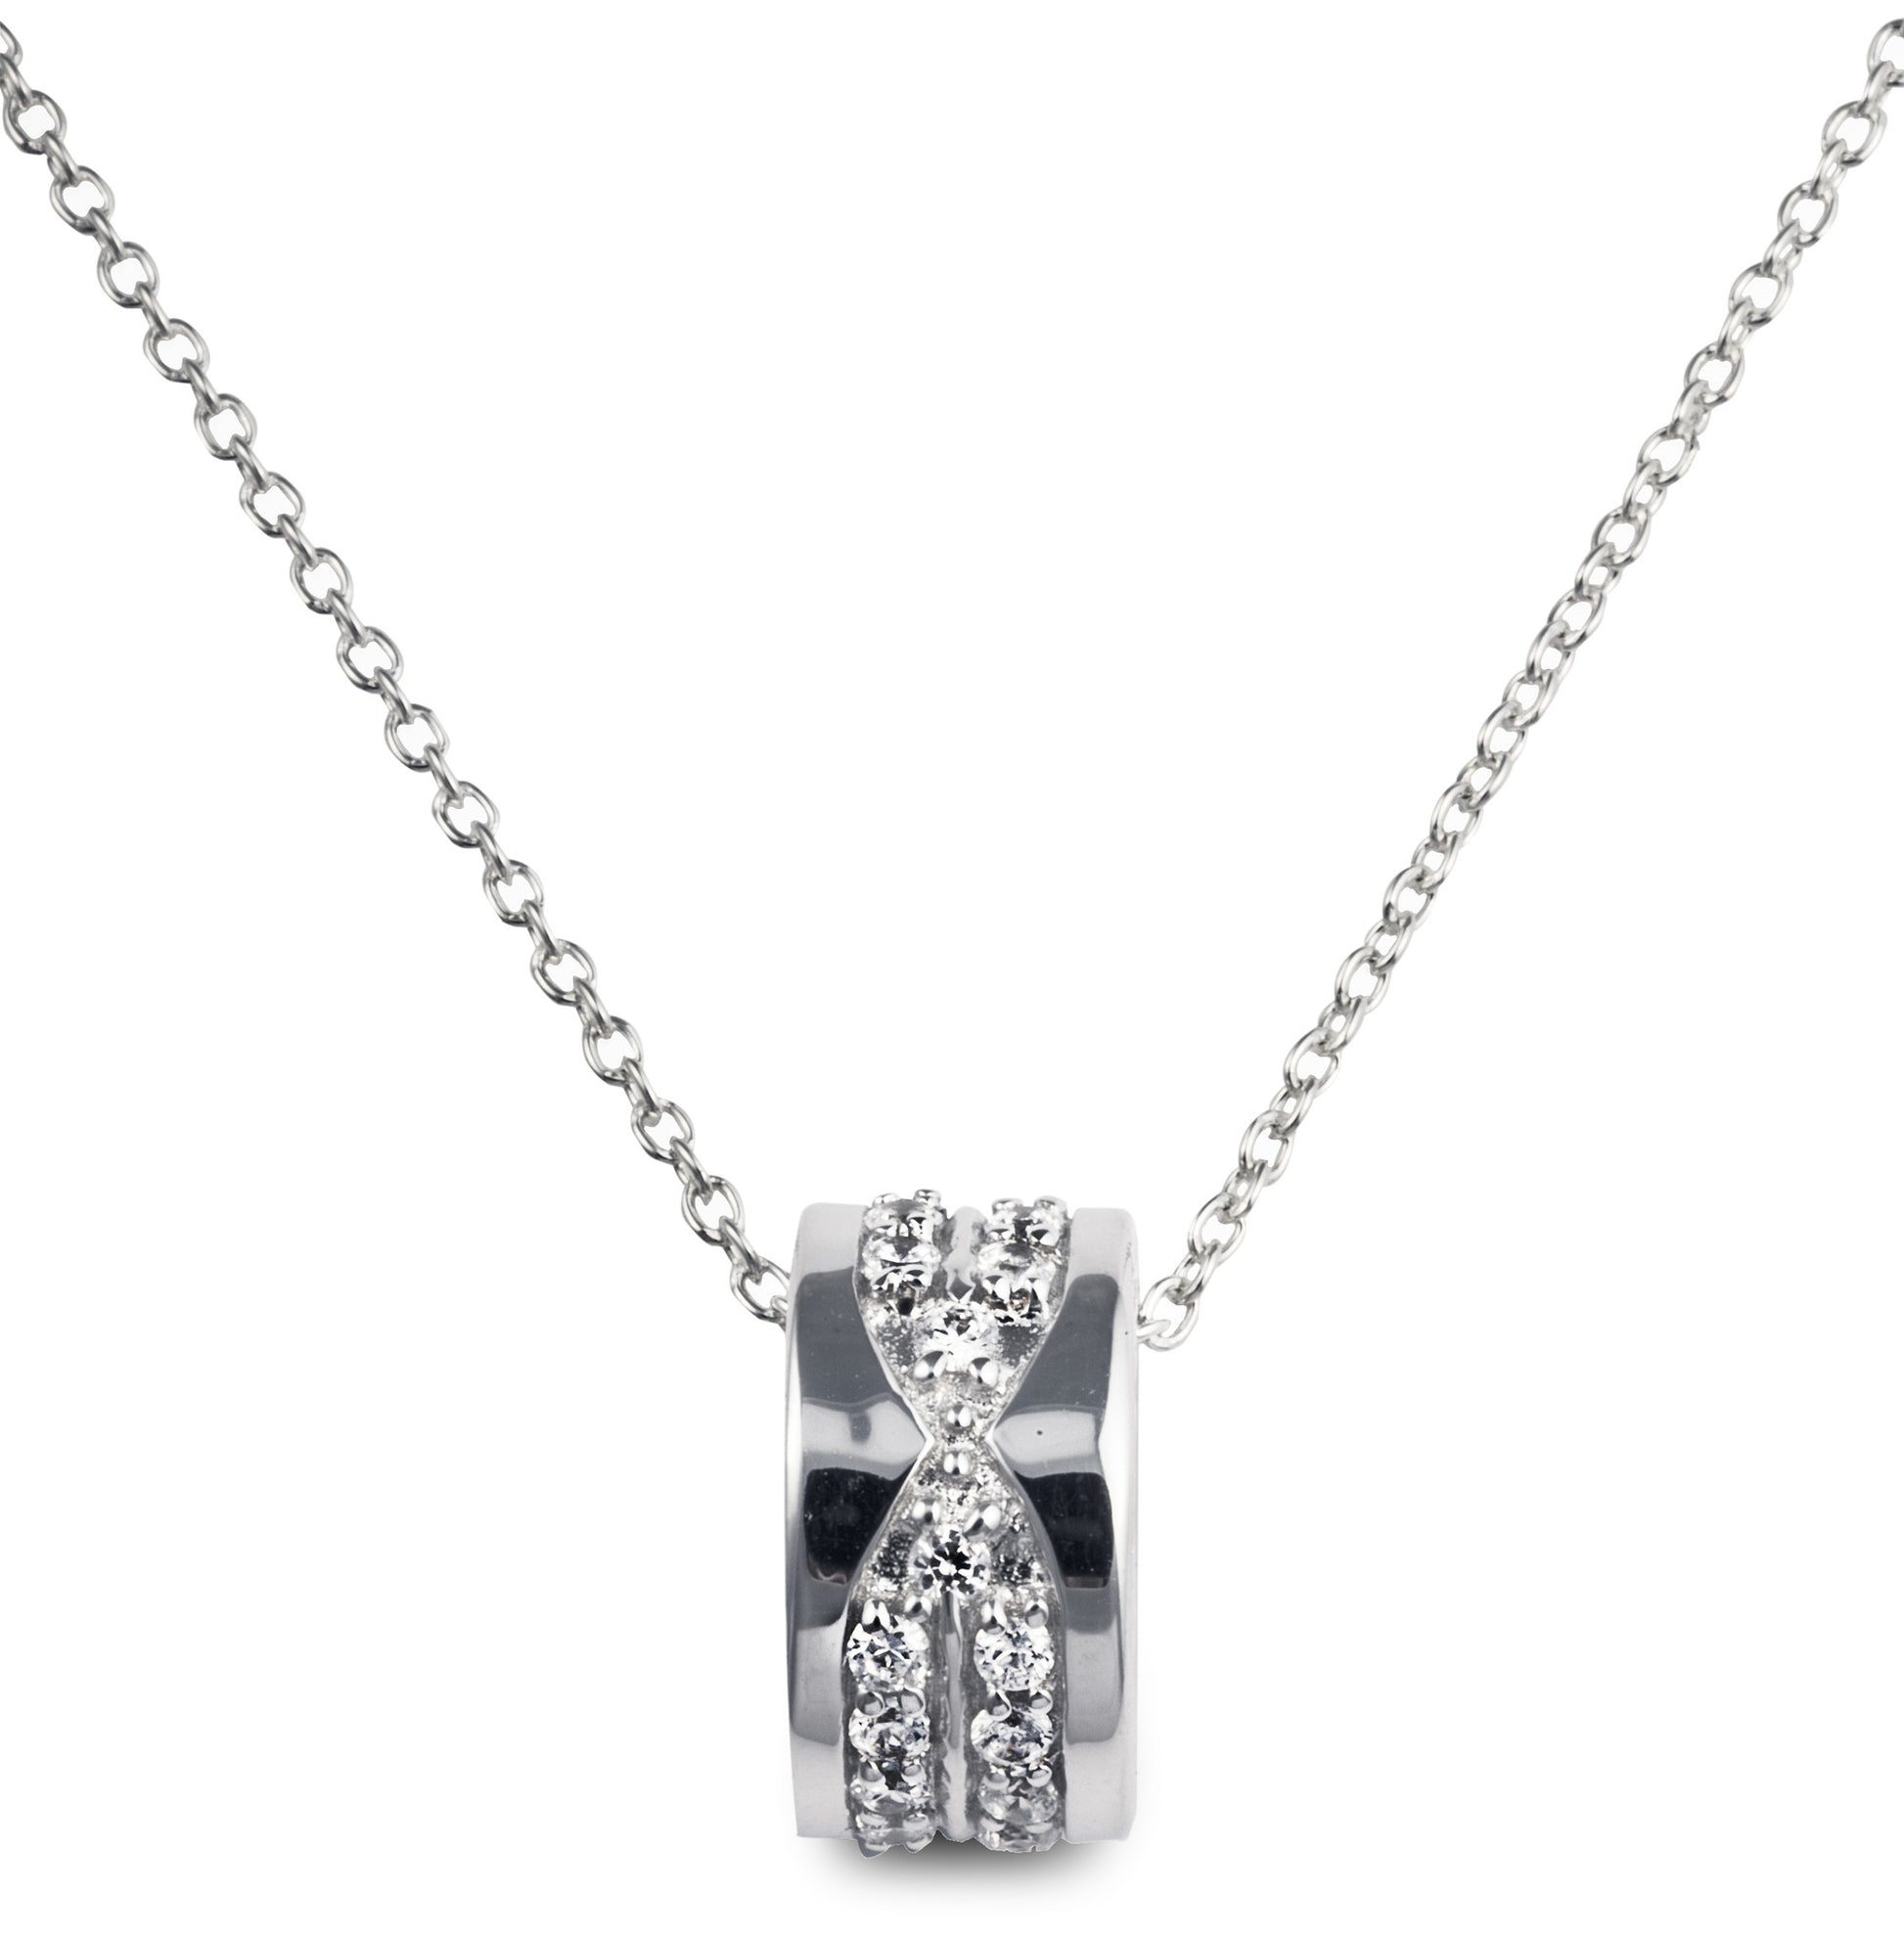 The Zion Bling Necklace is a solid 925 sterling silver necklace that features clear cubic zirconia stones and our signature Roman Numerals on the sides. Result: Takes you to Europe.  Make it yours with worldwide shipping.